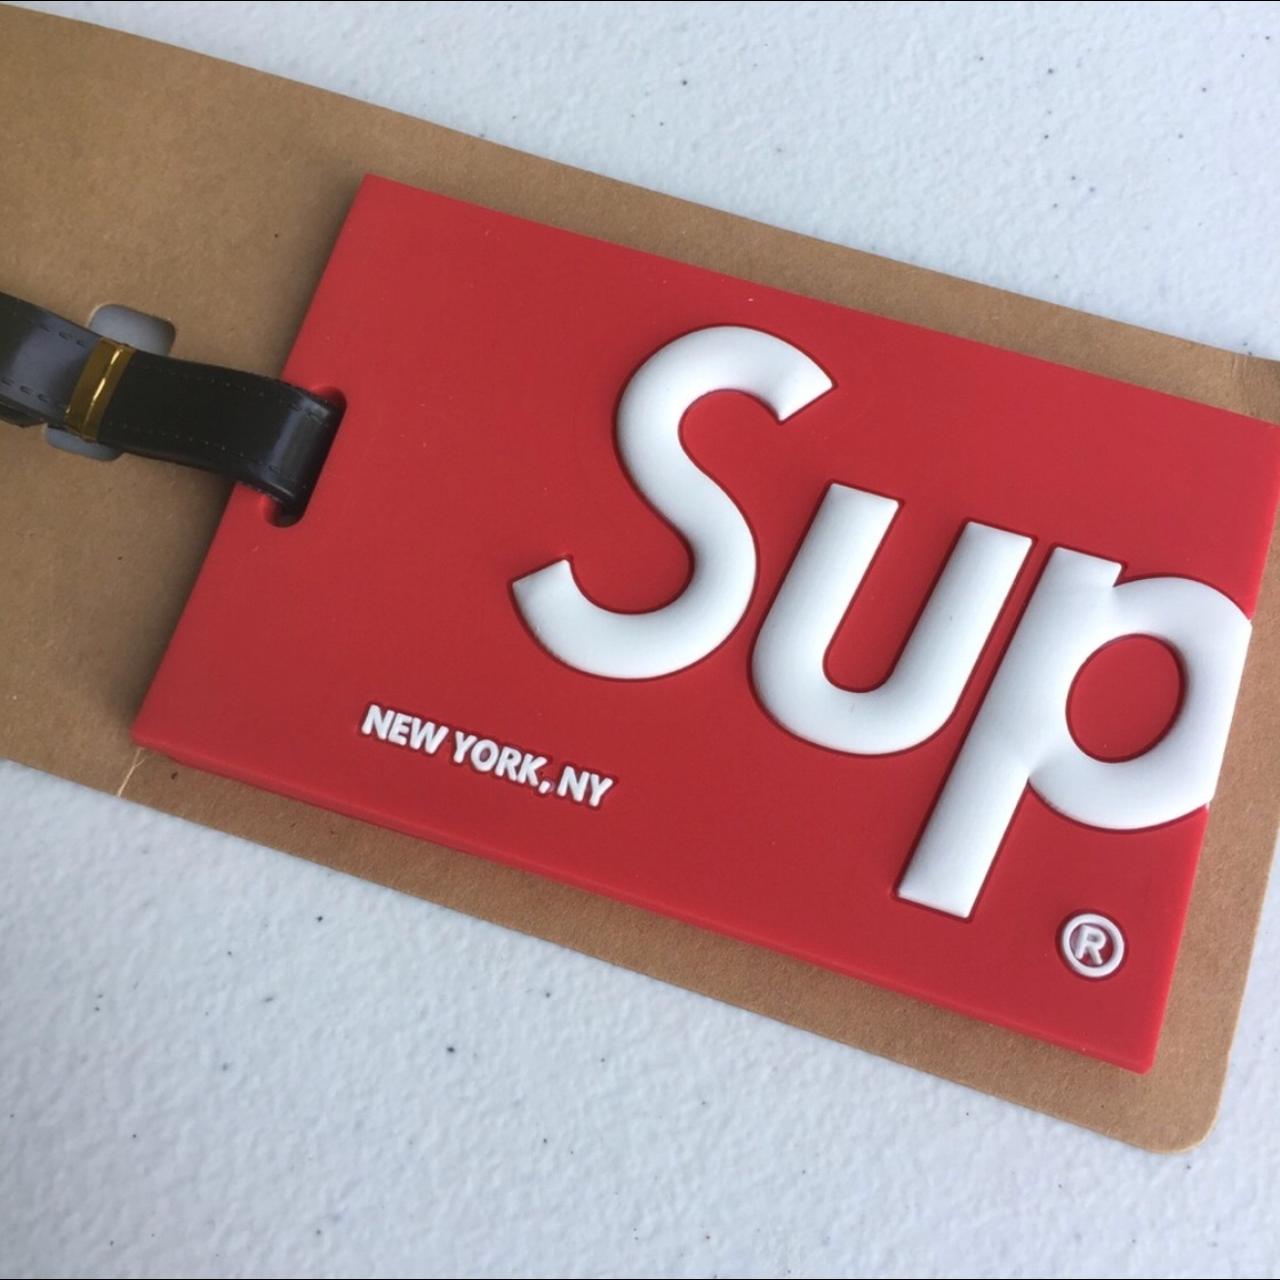 Supreme Luggage Tag Price includes shipping! - Depop